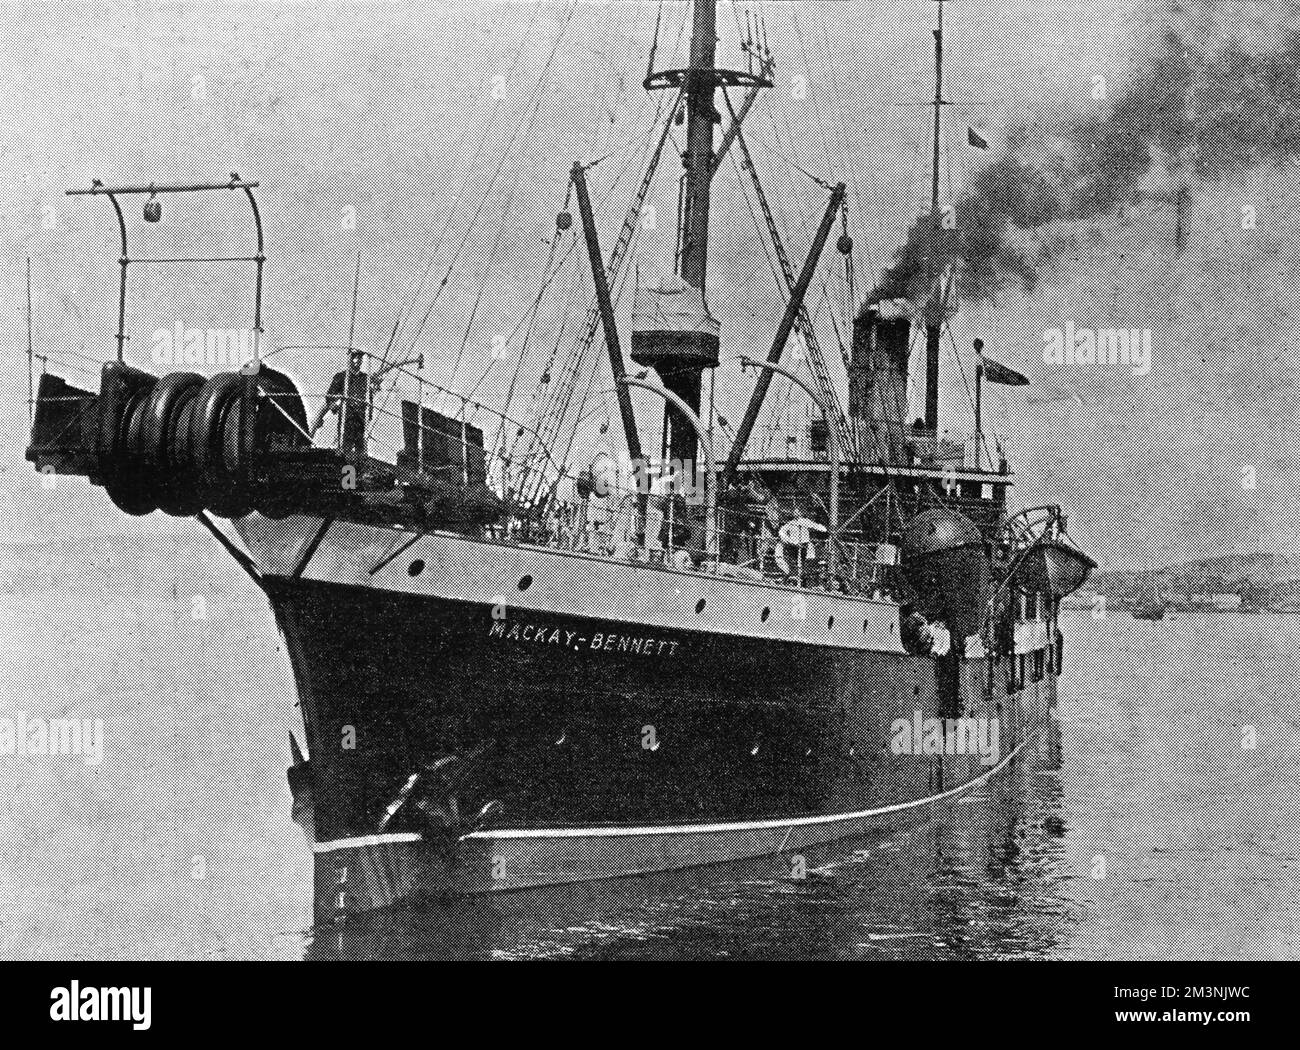 The cable ship Mackay-Bennett, which recovered over 200 bodies from the scene of the Titanic disaster, before heading for Halifax, Nova Scotia     Date: April 1912 Stock Photo